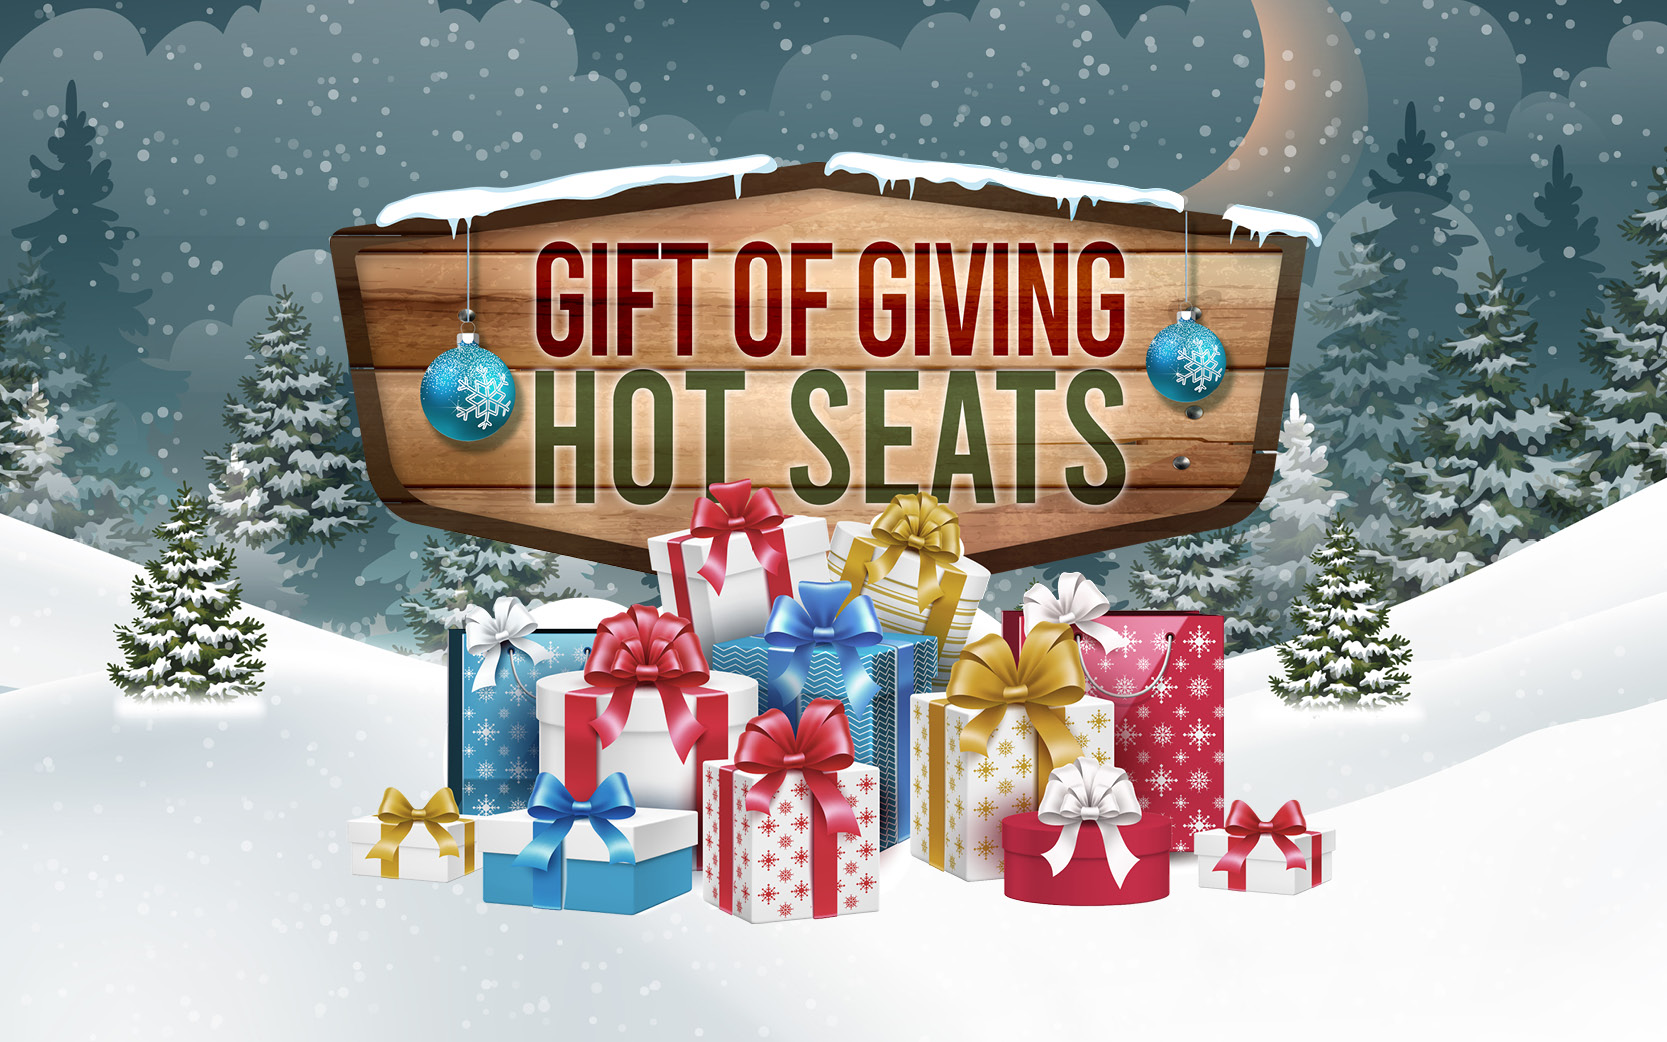 Gift of Giving Hot Seats